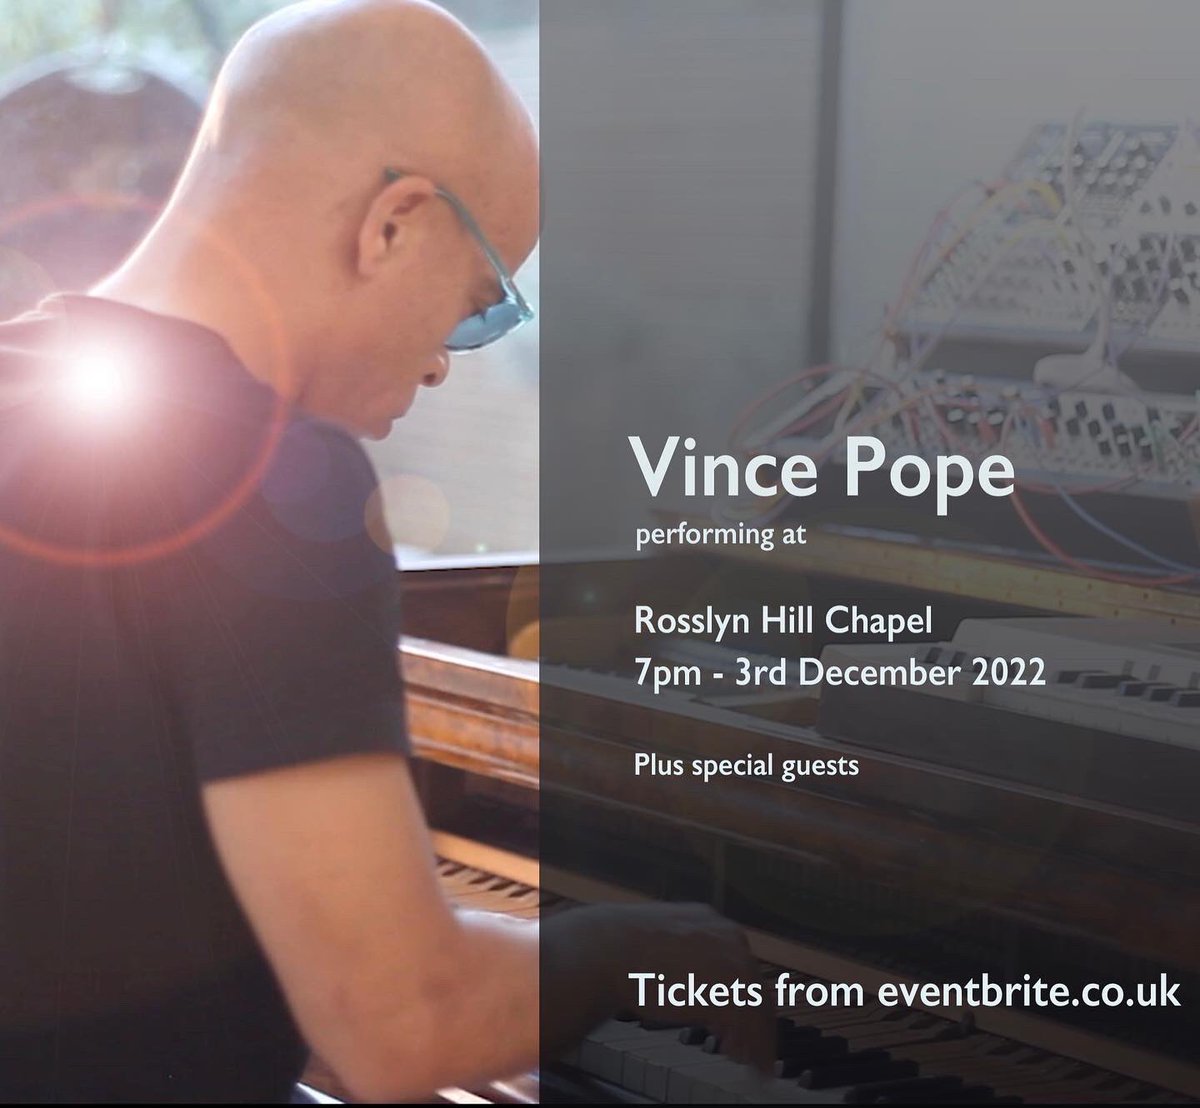 Come along see some new music in the beautiful surroundings of Rosslyn Hill Chapel - Hampstead - December 3rd tickets through eventbrite - eventbrite.com/e/vince-pope-a…